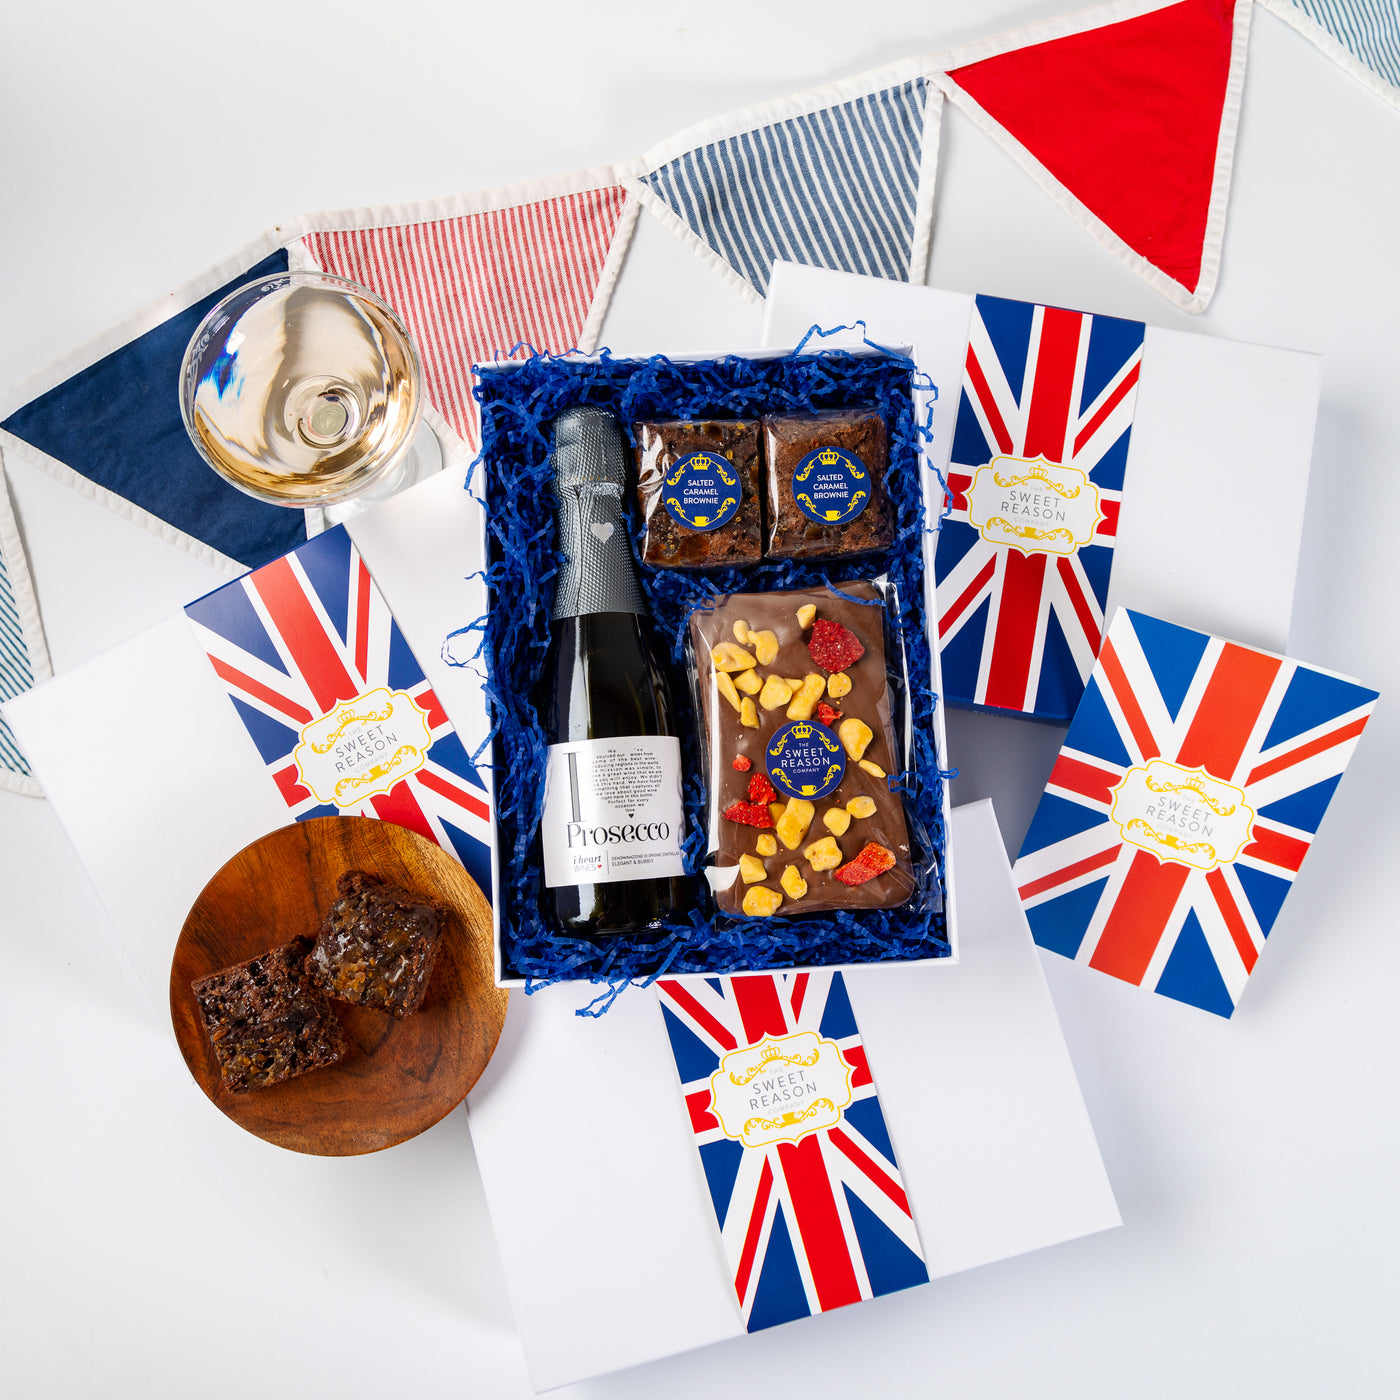 'British' Chocolate Slab, Brownies and Prosecco